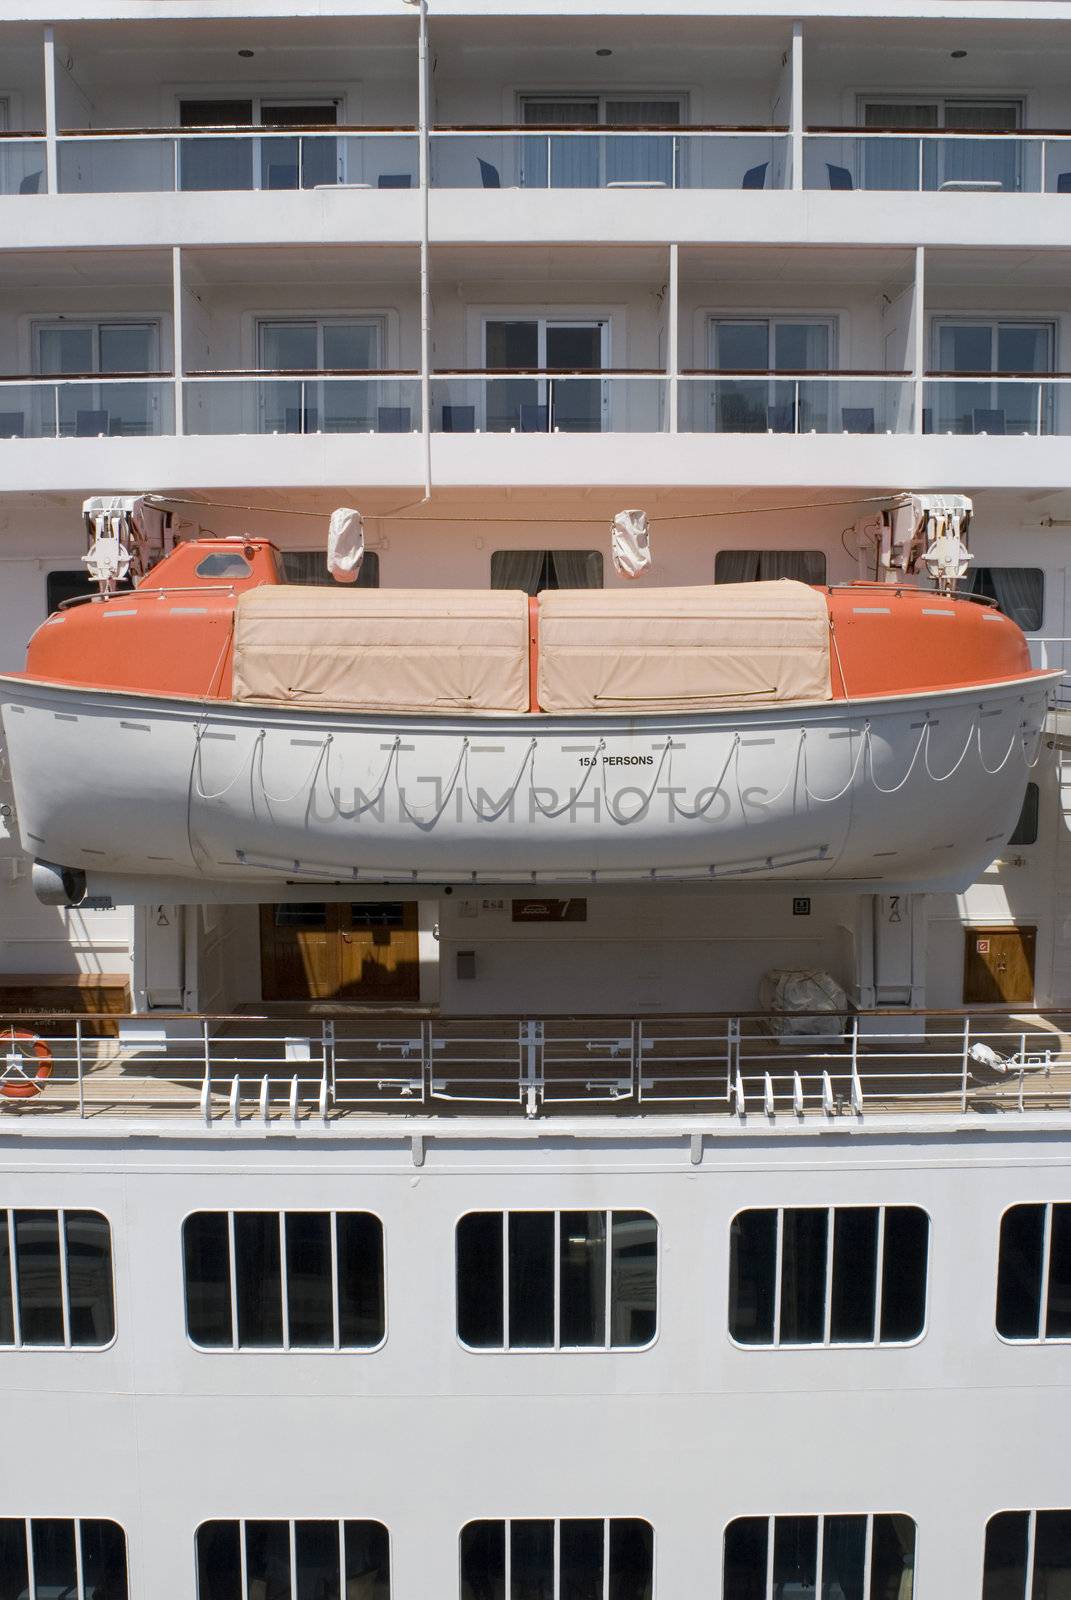 A cruise ship lifeboat, concept of a safe haven or a backup plan